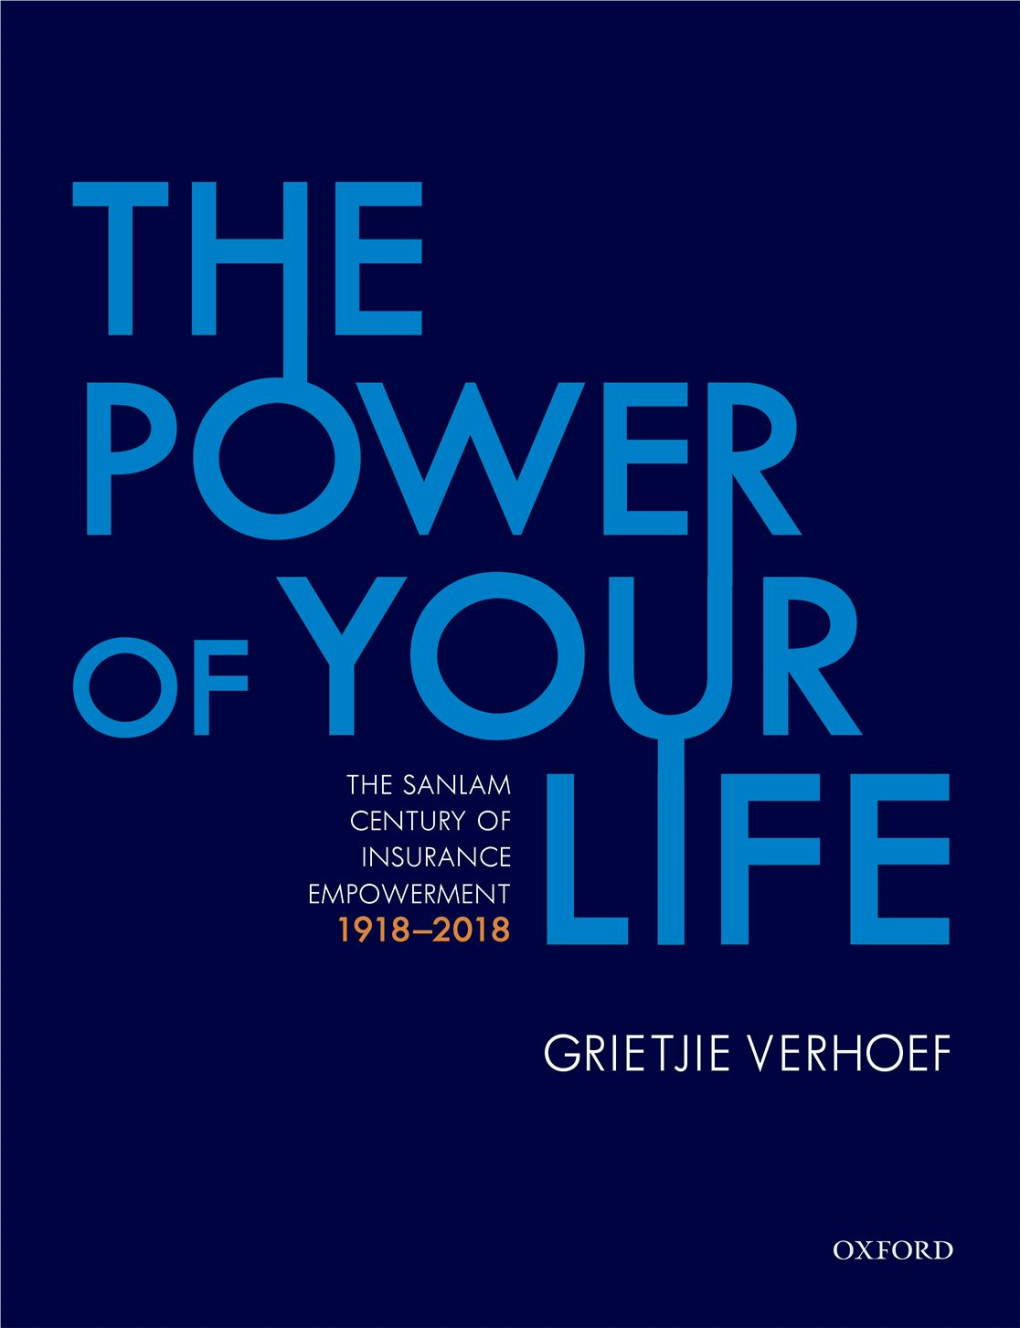 The Power of Your Life: the Sanlam Century of Insurance Empowerment